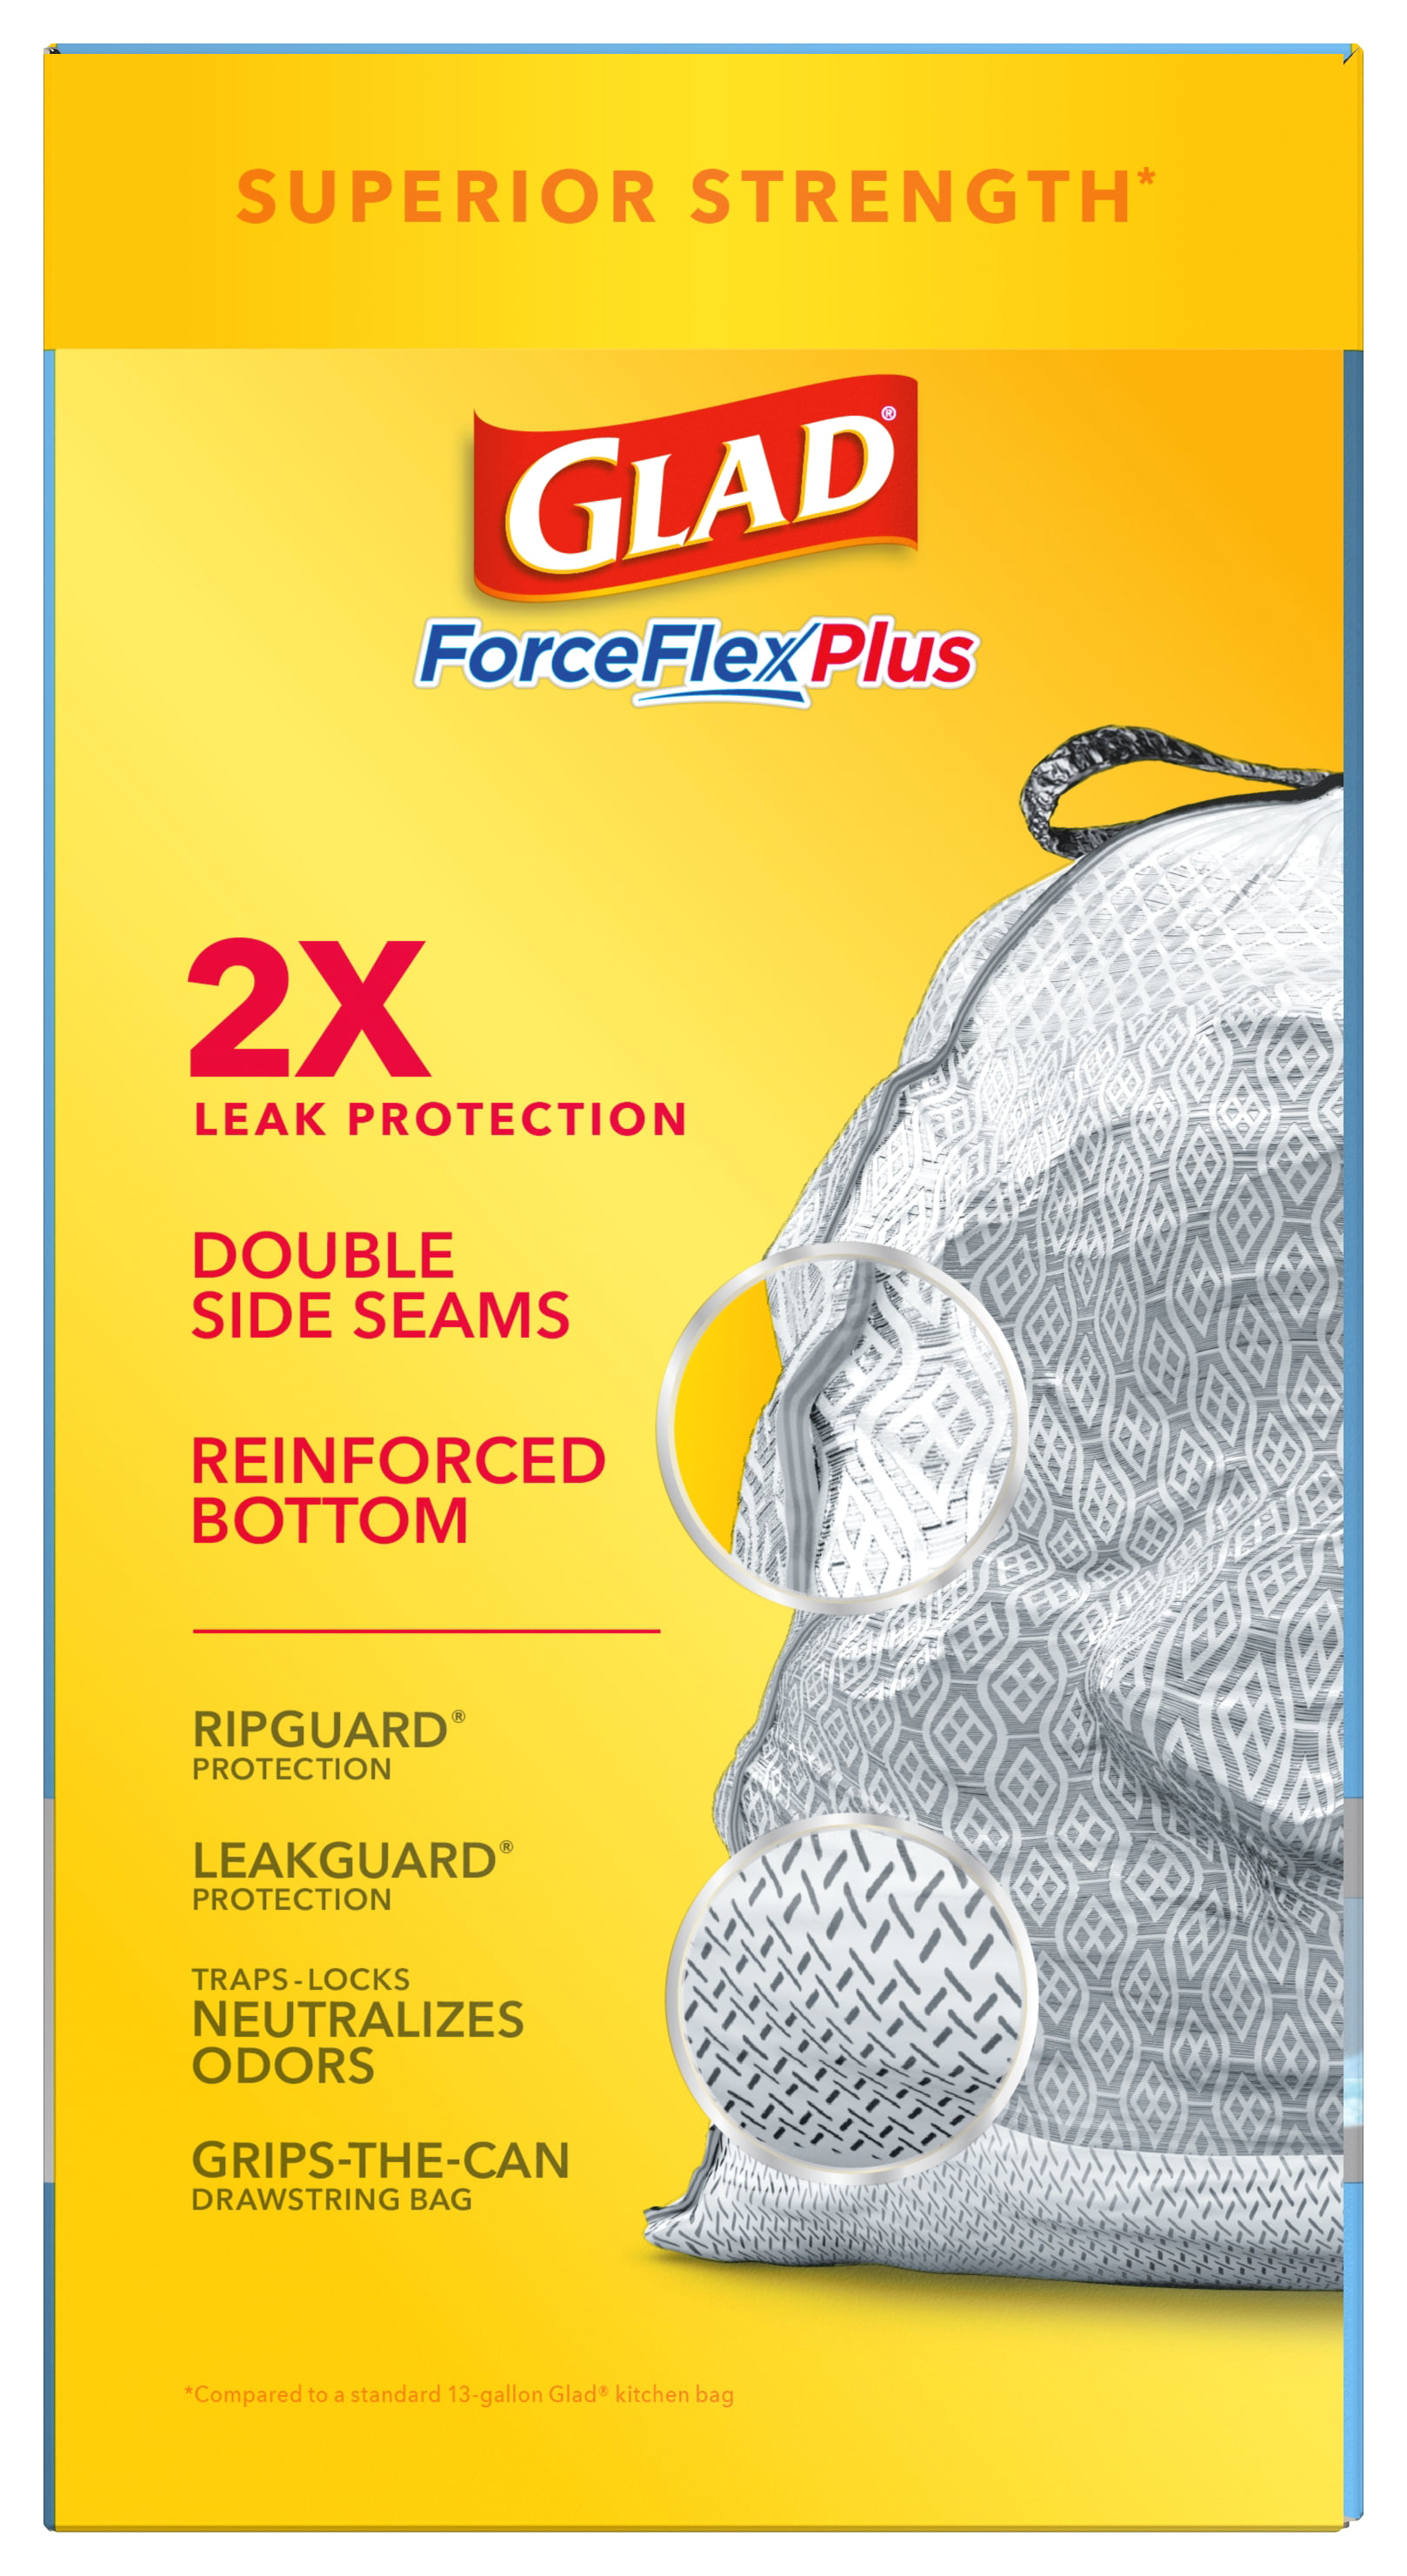 Glad ForceFlexPlus X-Large Kitchen Drawstring Trash Bags - Fresh Clean with  Febreze Freshness - Large Size - 20 gal Capacity - 24.02 Width x 32.01  Length - Gray - 1Each - 30 Per Box - Garbage, Kitchen, Office, Home - Zuma